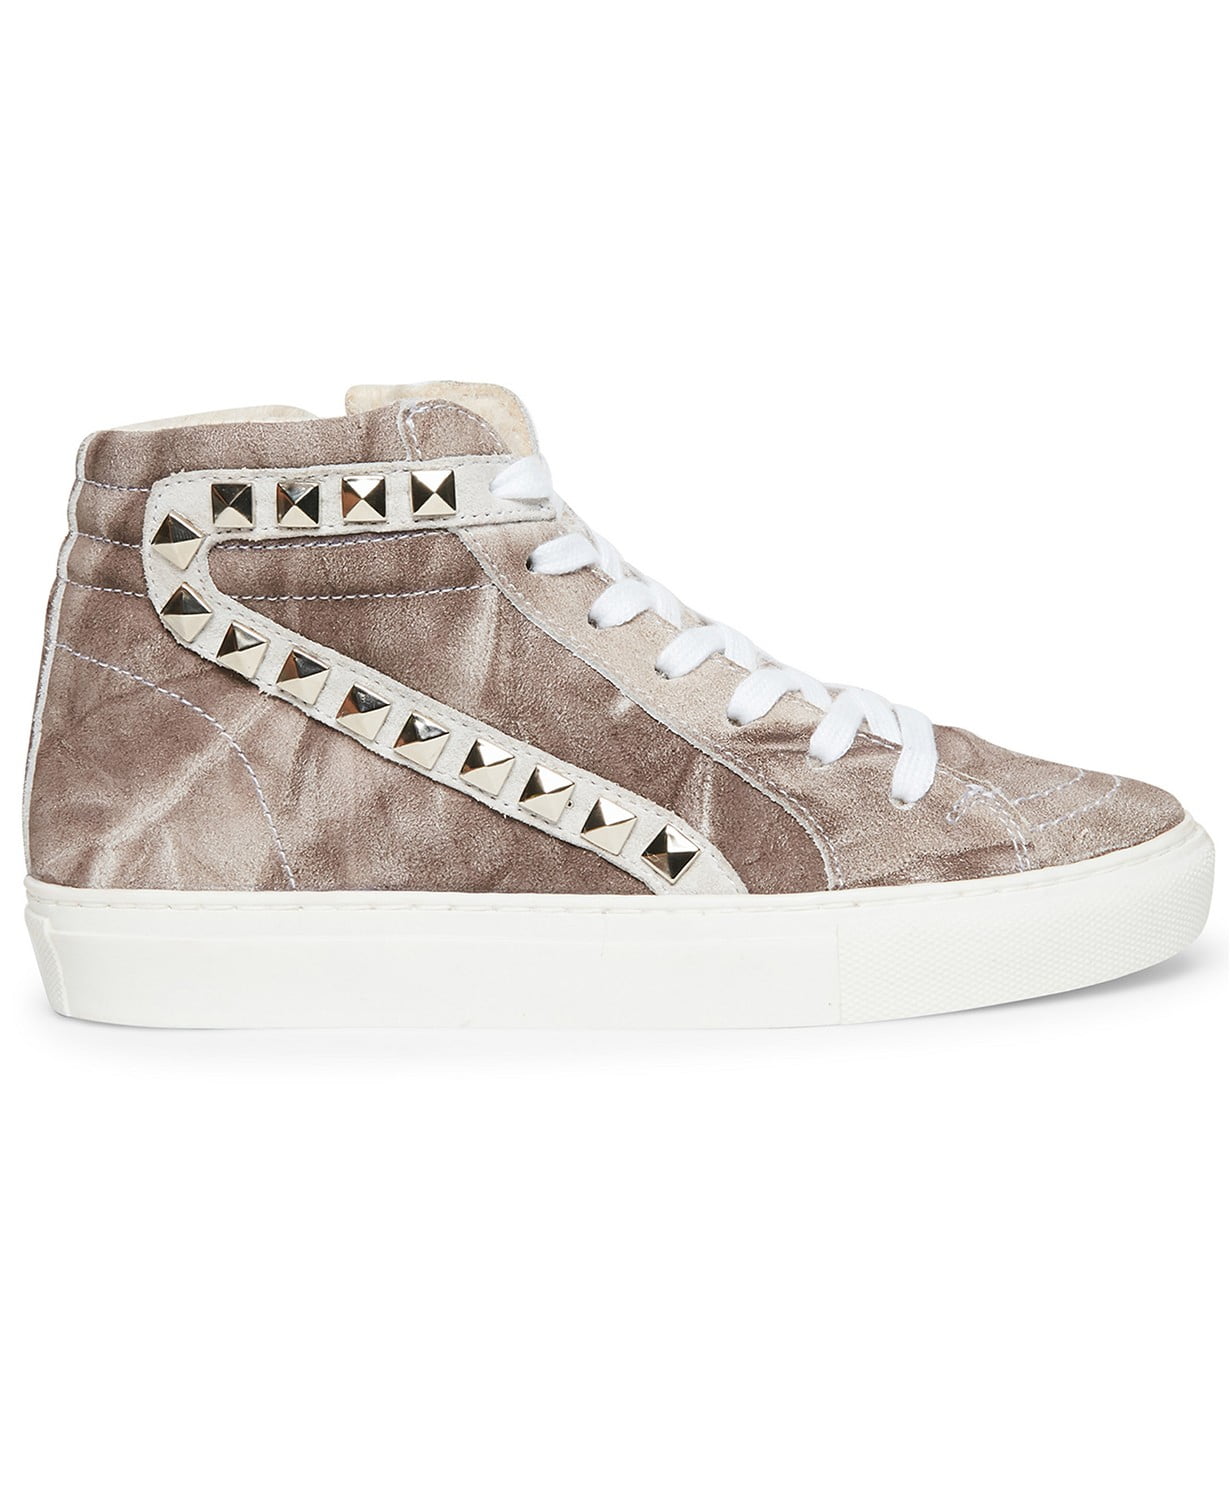 woocommerce-673321-2209615.cloudwaysapps.com-steve-madden-womens-grey-suede-tracey-f-high-top-sneakers